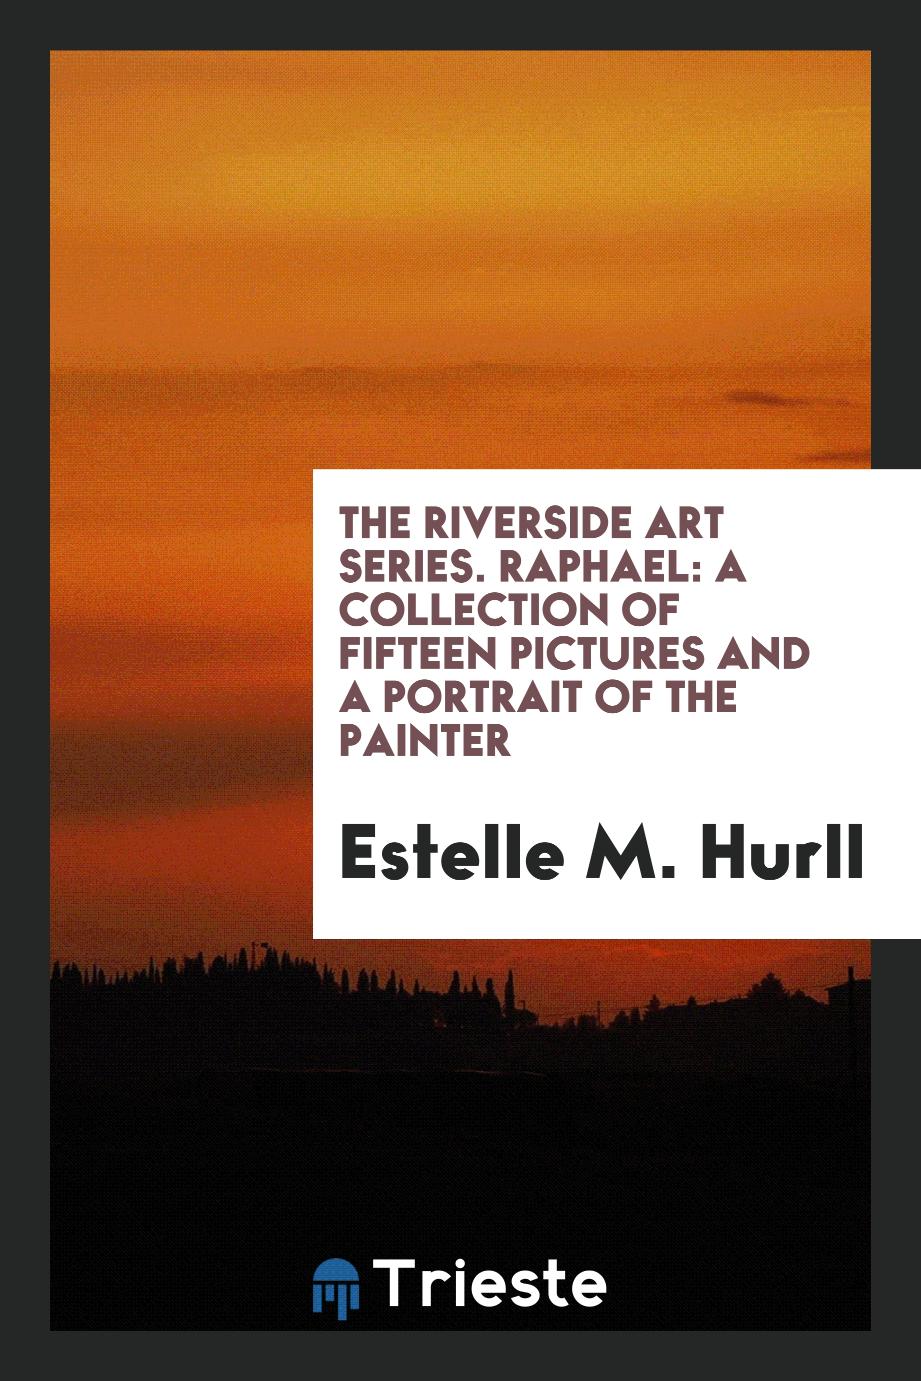 The Riverside Art Series. Raphael: A Collection of Fifteen Pictures and a Portrait of the Painter